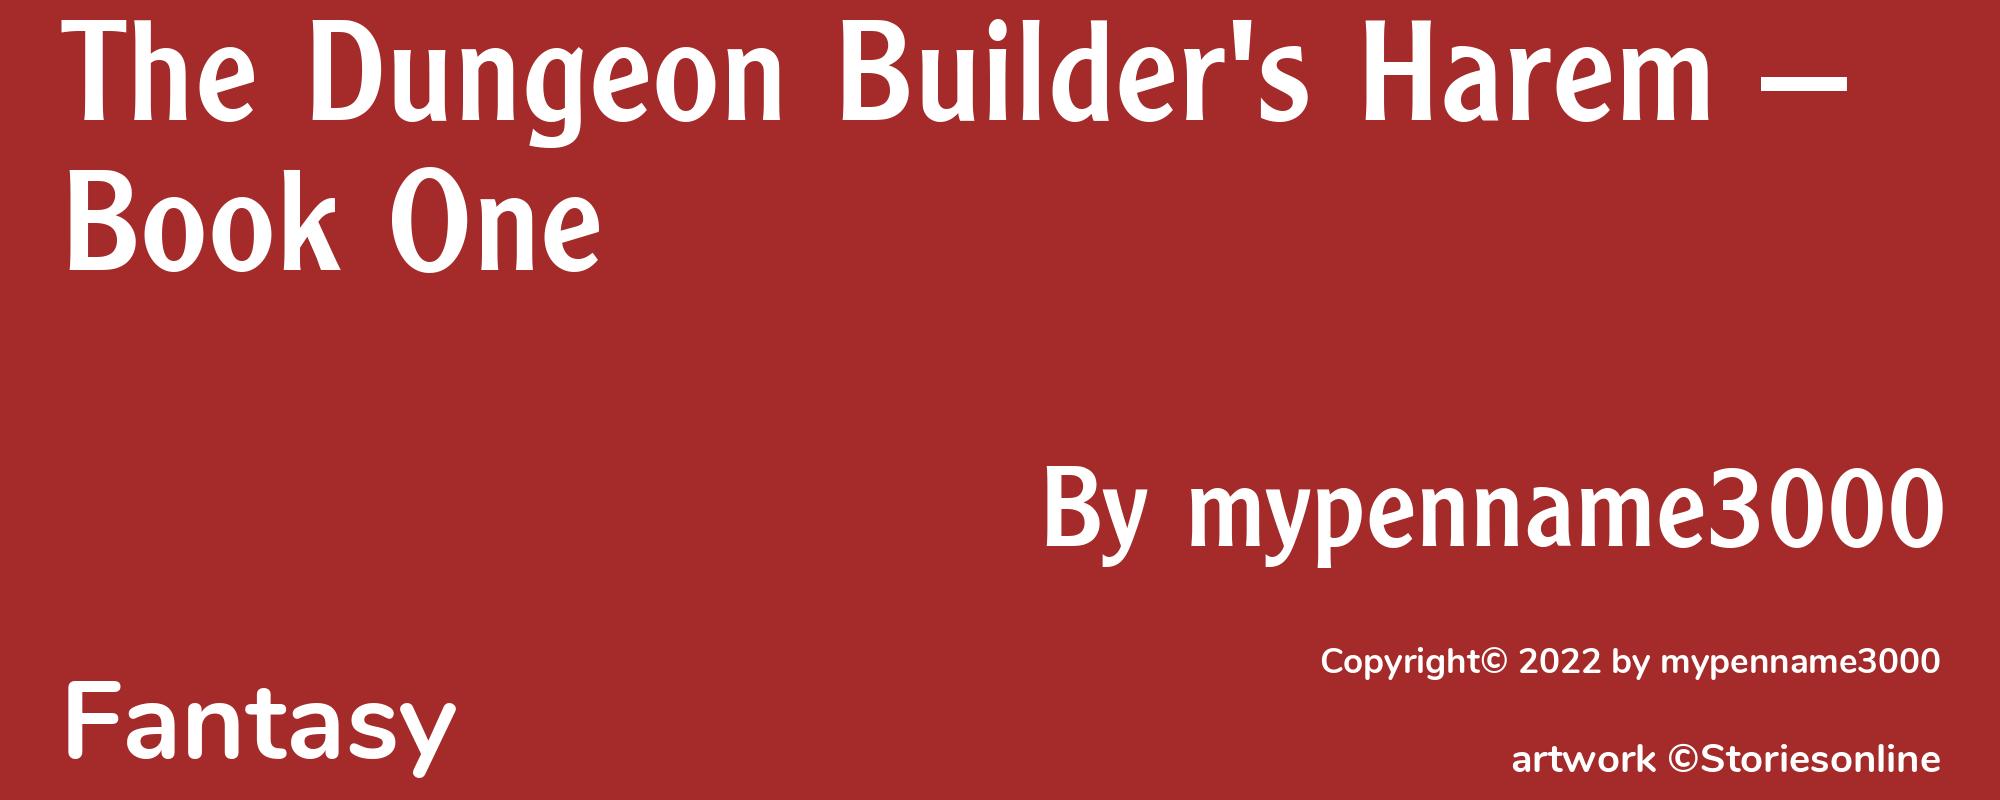 The Dungeon Builder's Harem — Book One - Cover